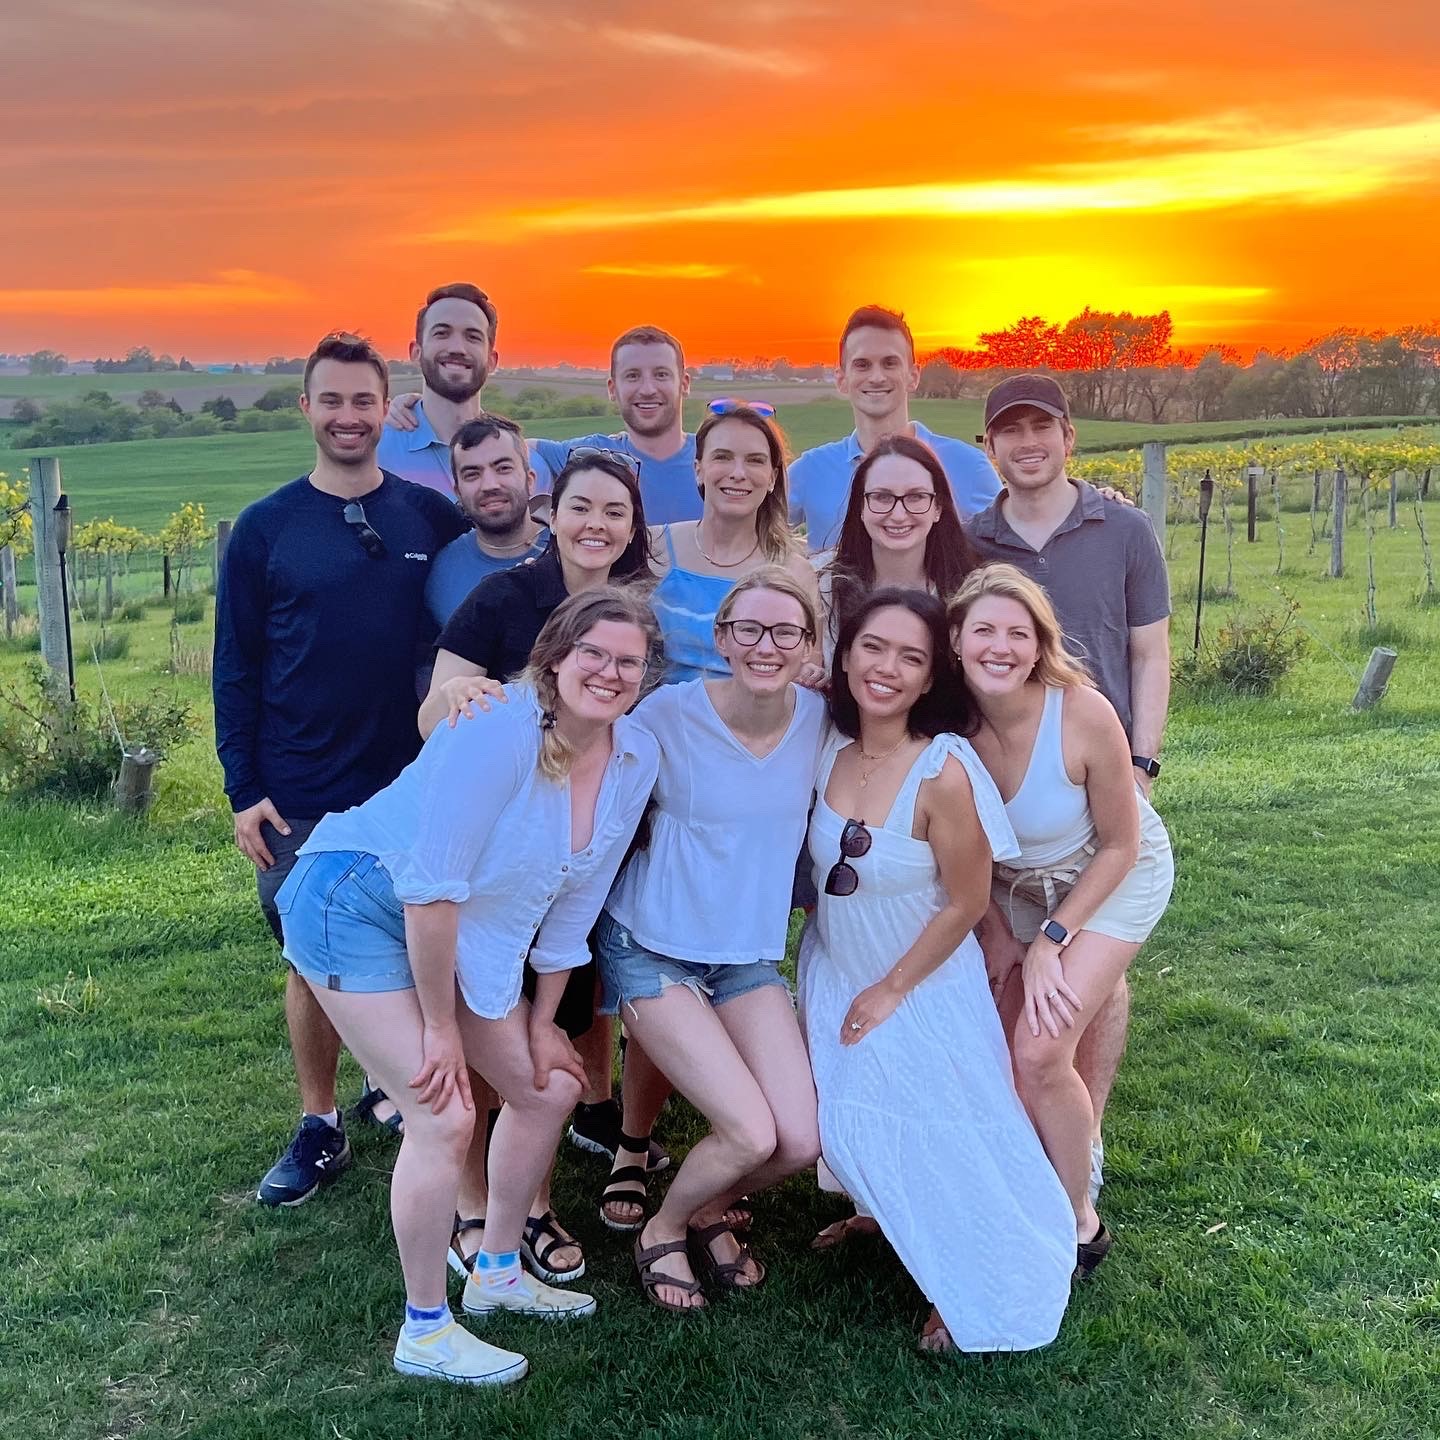 Dermatology 2022 group photo with sunset in the background